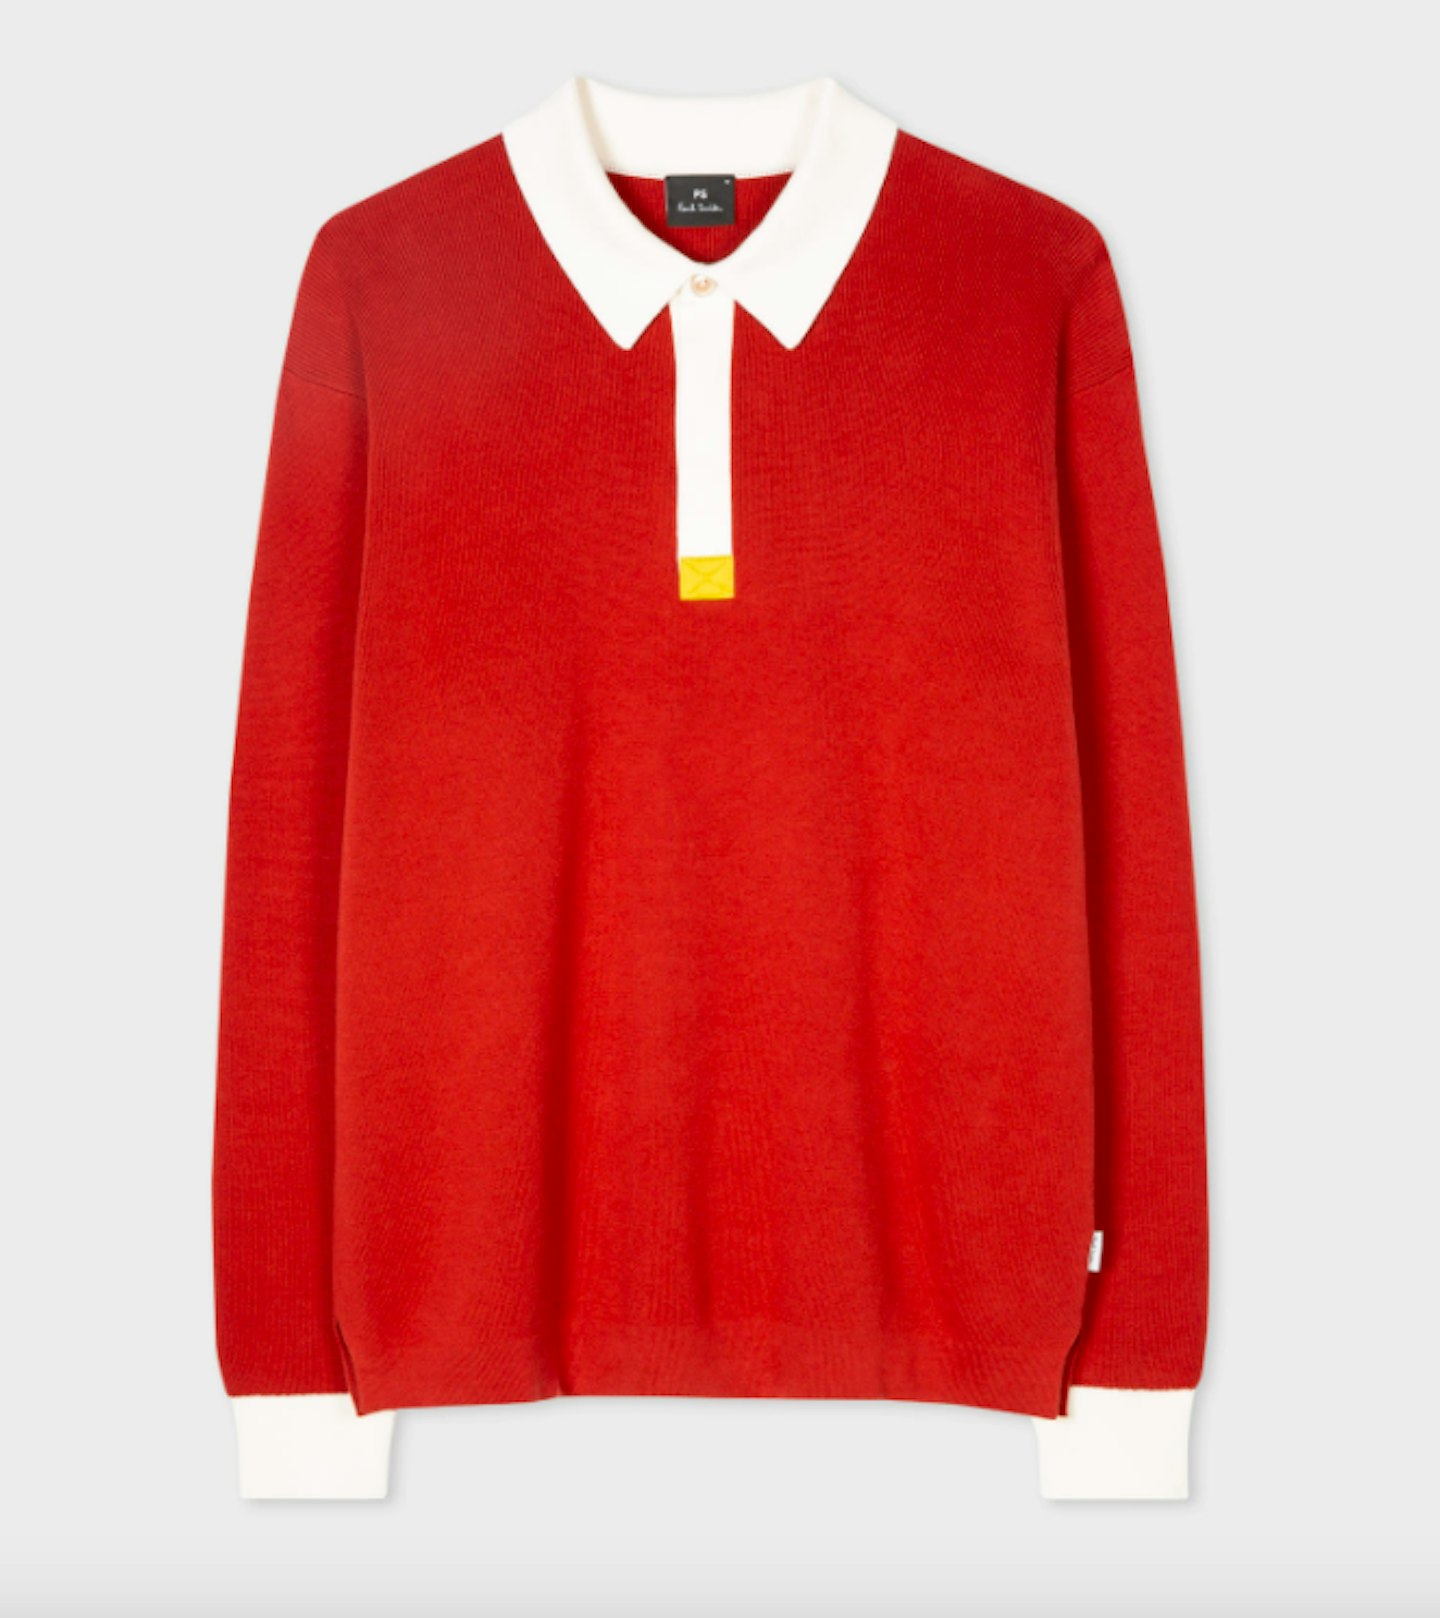 Paul Smith, Brick Red Knitted Cotton Rugby Shirt, £200